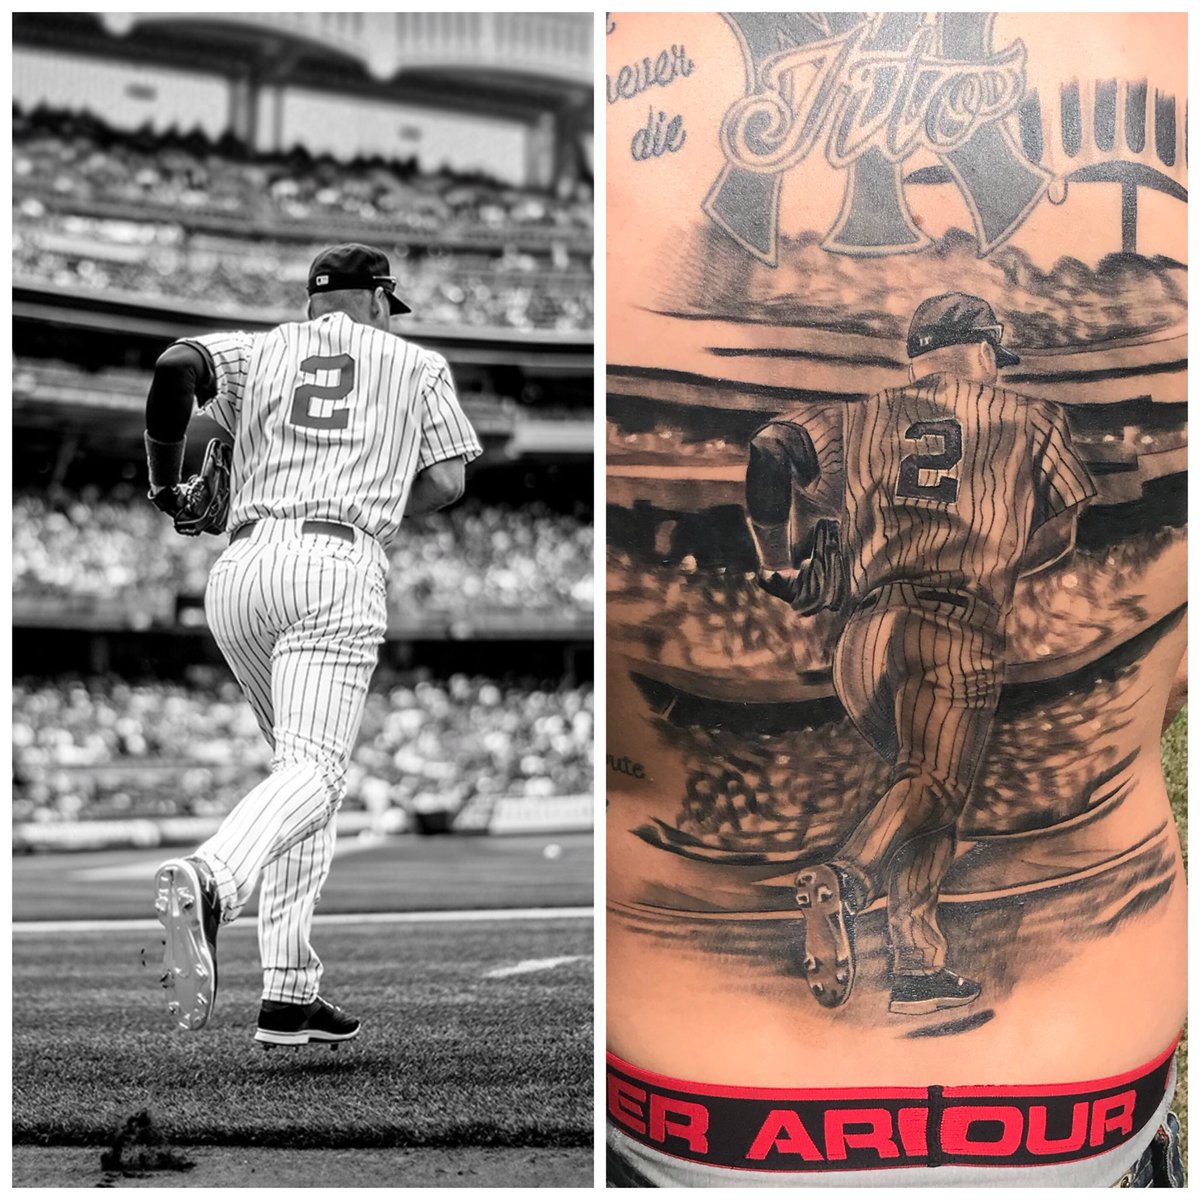 Hasn’t even been a year since I got this piece done, and I still look at it just as amazed as the day I got. #derekjeter #TheCaptain #lastgame #NewYorkYankees #GOAT #RE2PECT #legendary  #yankeelife #diehard #bronxbombers #sportsportrait #INKED #tattoos #MLB ⁦#espn #sportsword